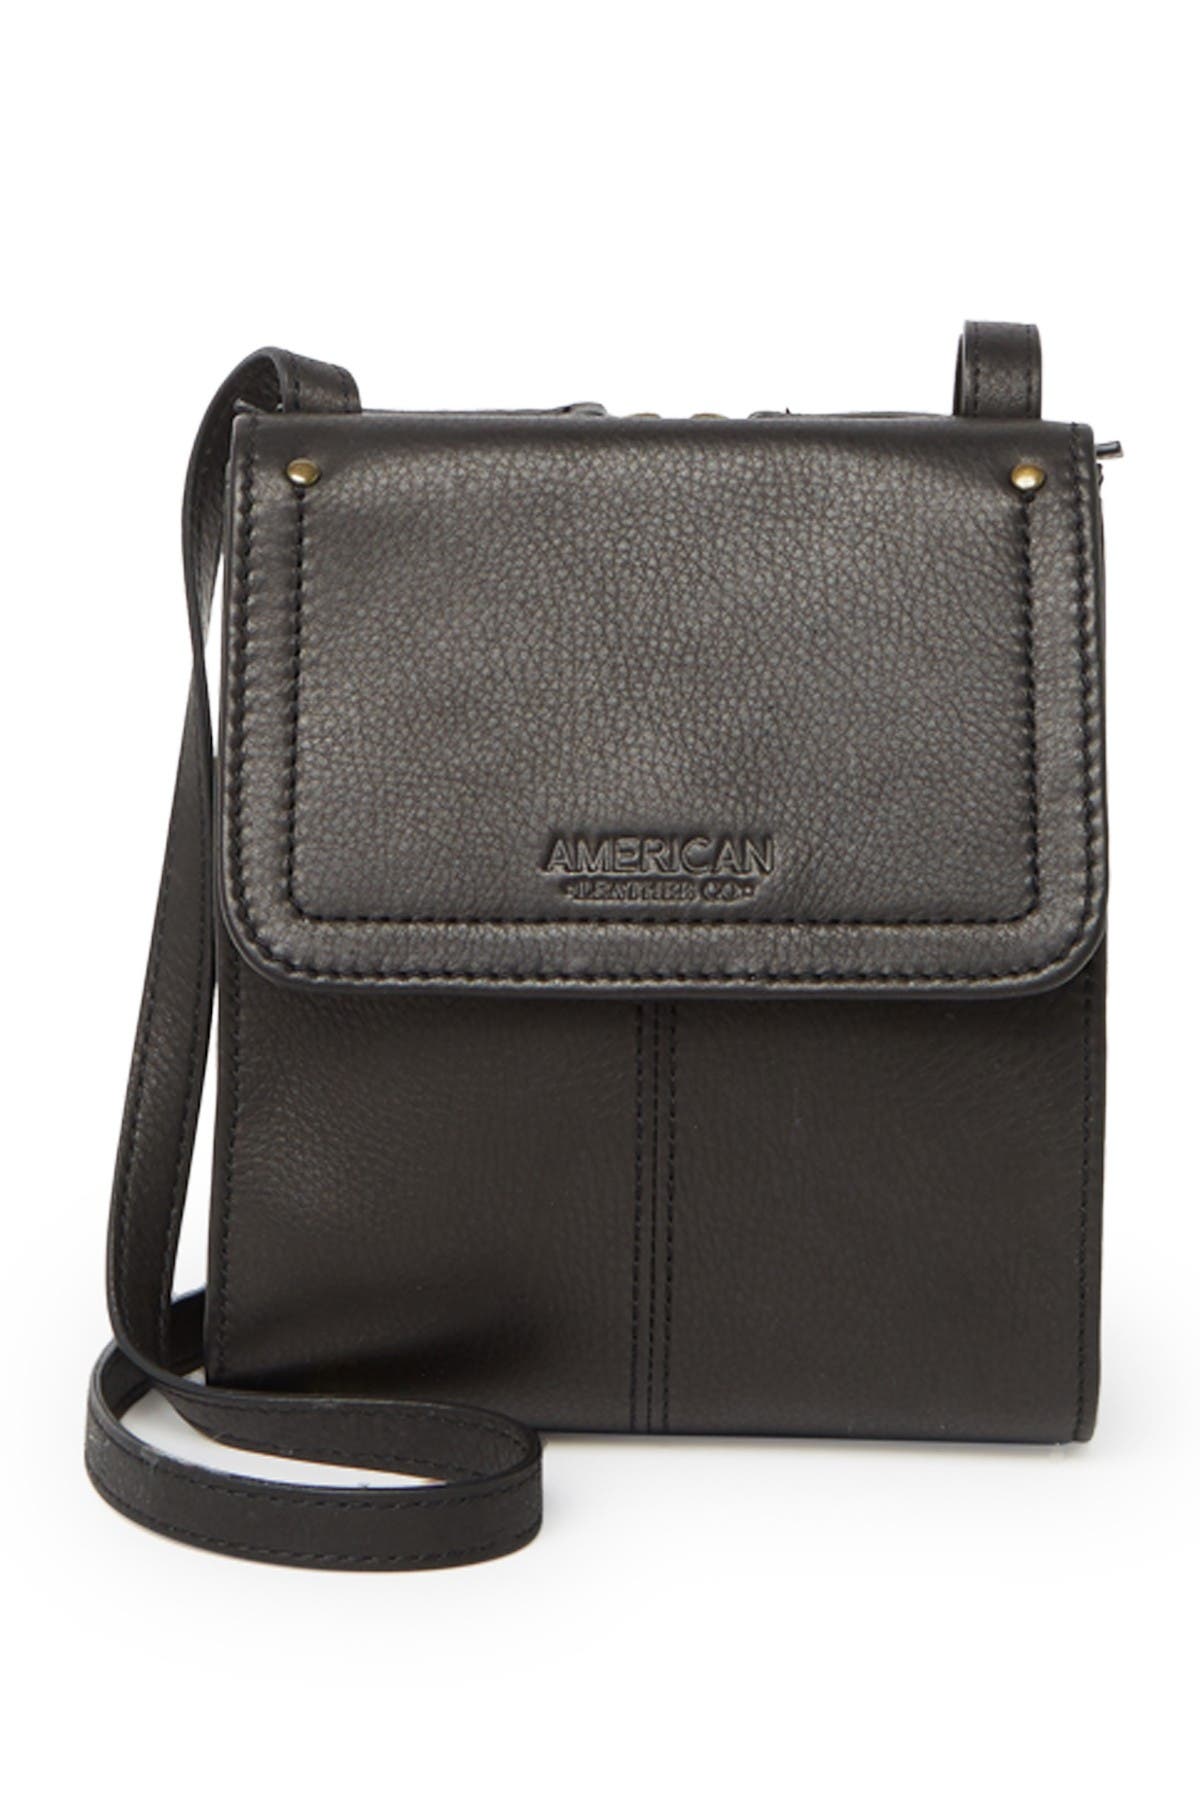 American Leather Co. Kansas Colorblock Crossbody Leather Bag In Black Smooth